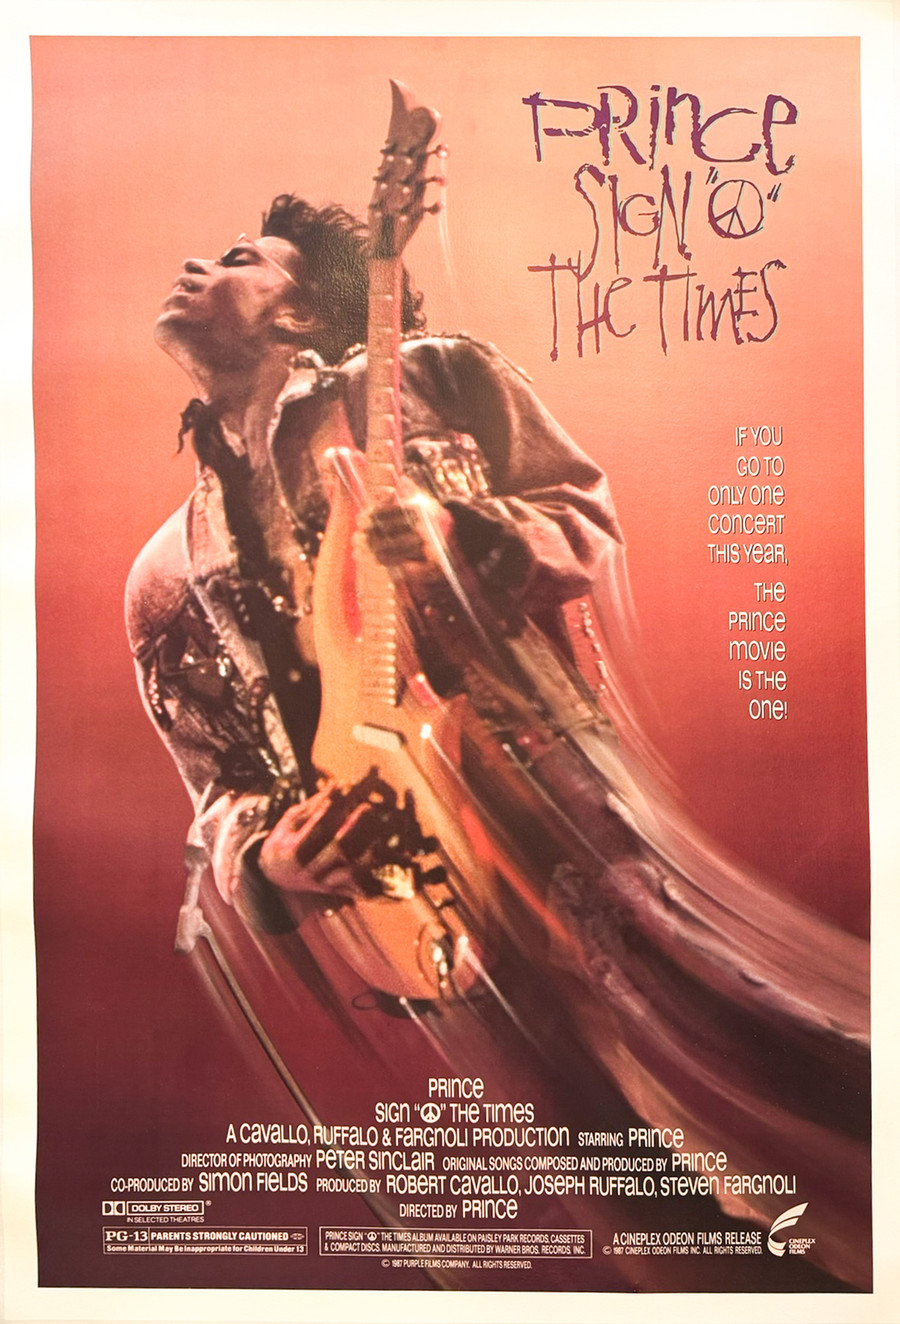 Prince Sign O The Times Original American 1987 Theatrical Folded 1 Sheet Movie Poster Linen Backed depicts Prince playing guitar